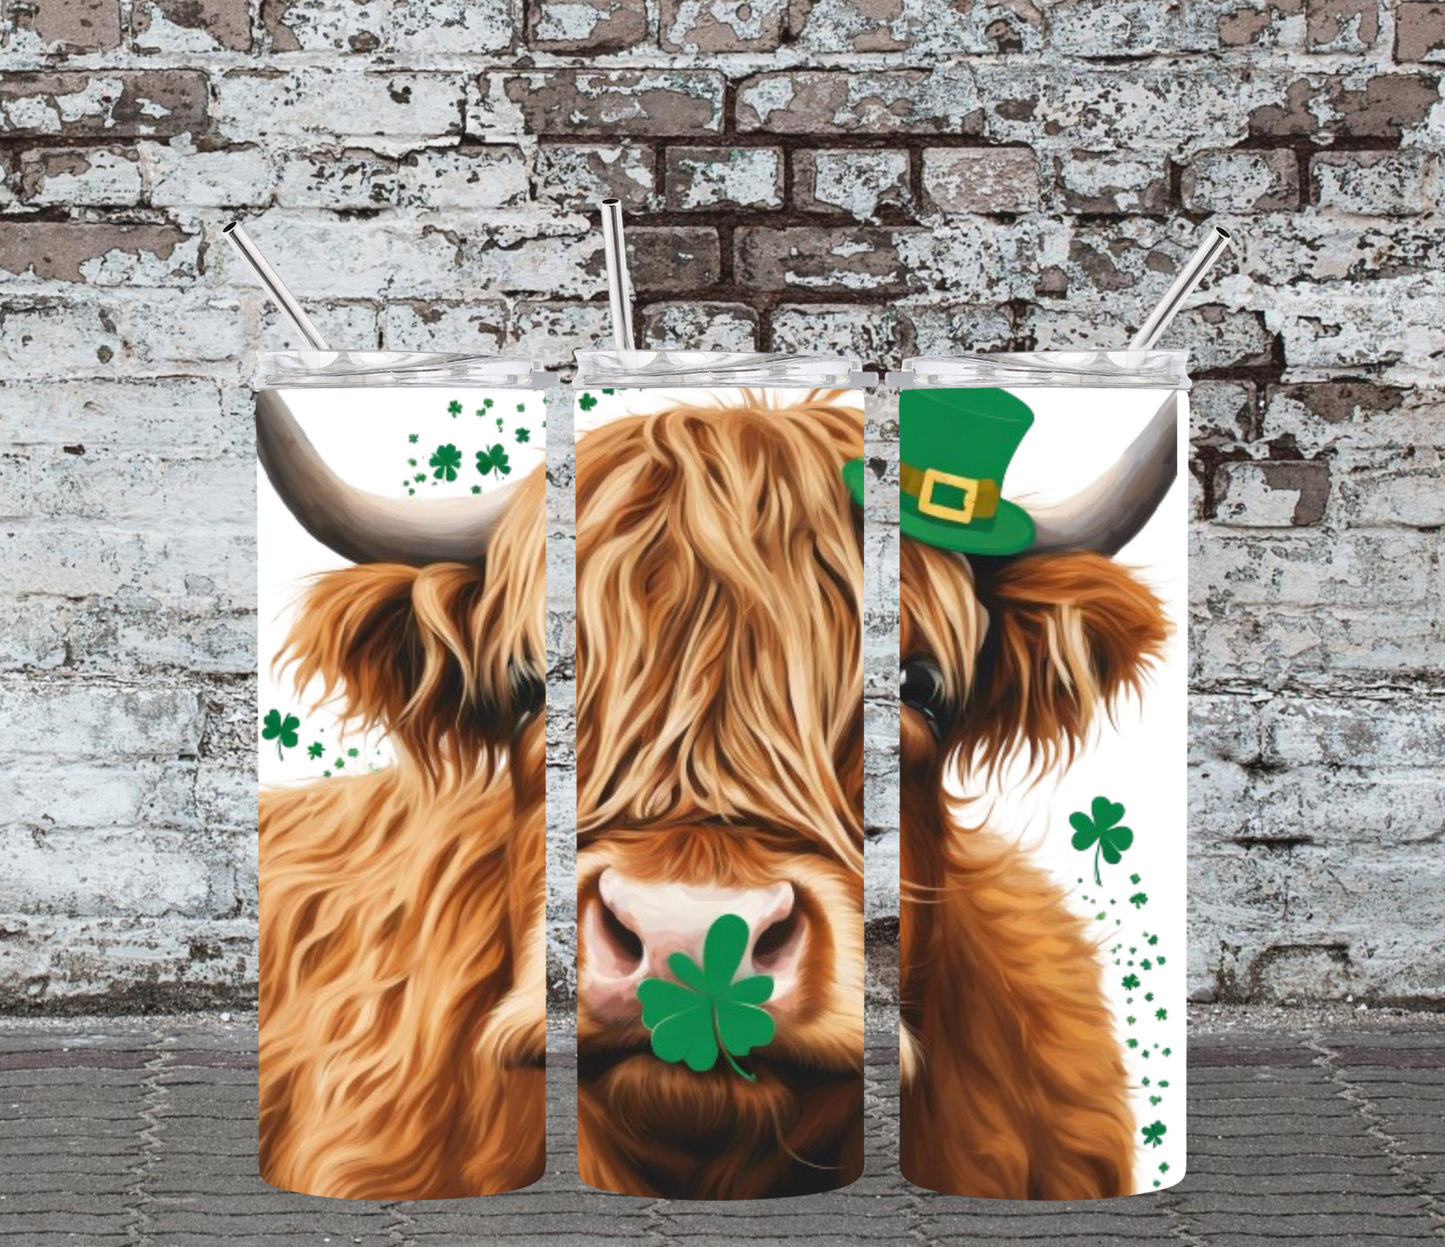 20OZ SKINNY TUMBLER - ST. PATTY'S DAY HIGHLAND COW WITH 4 LEAF CLOVER ON NOSE